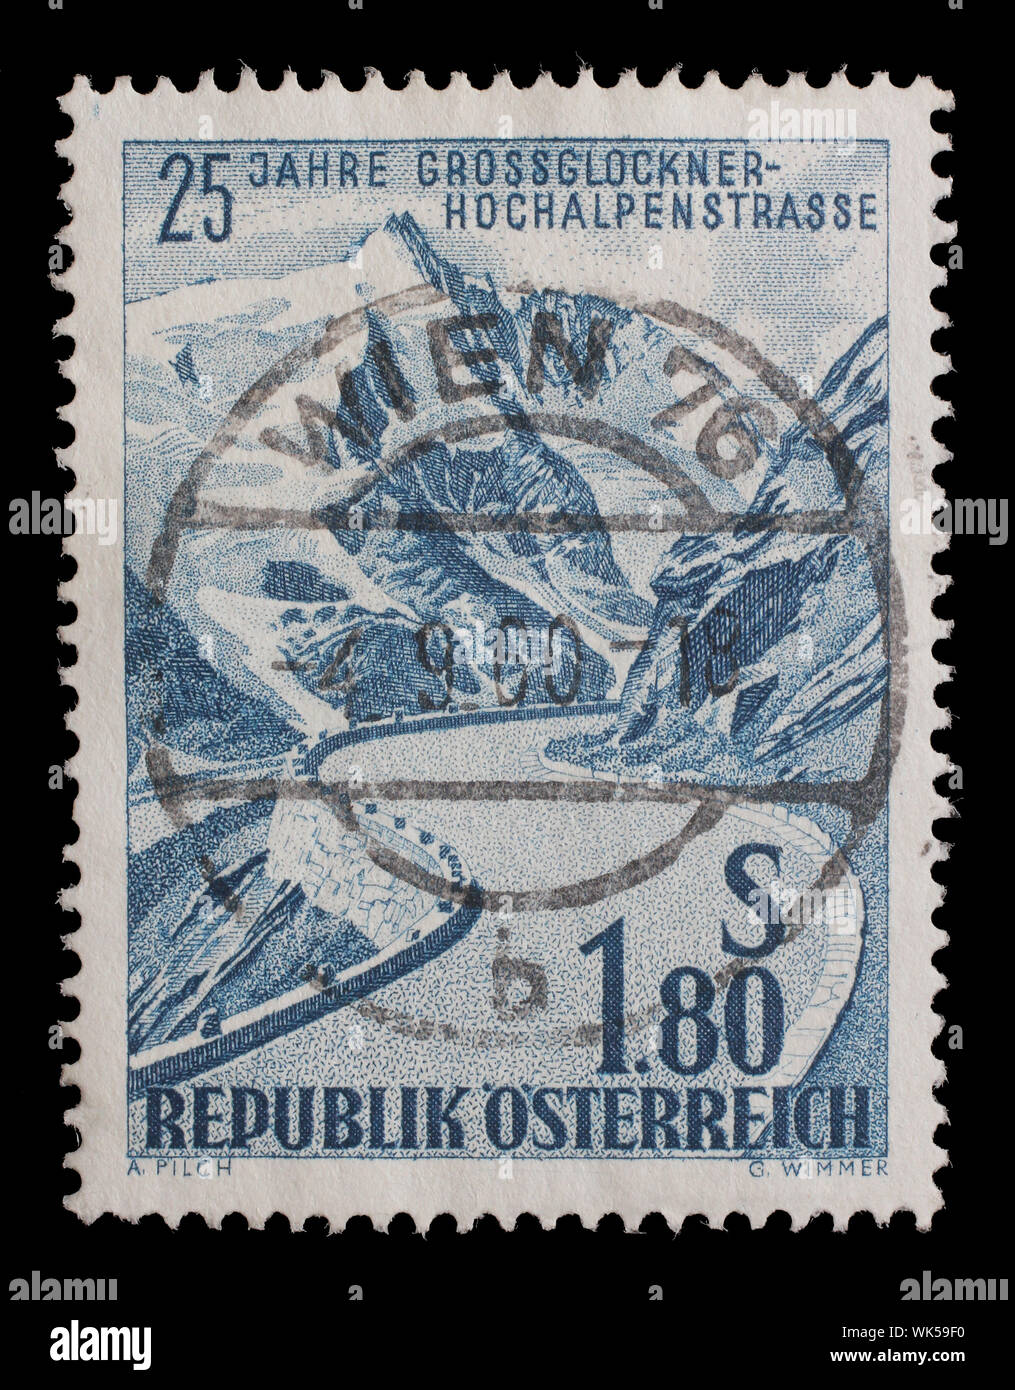 Stamp issued in the Austria shows the 25th Anniversary of the Opening of Großglockner Hochalpenstraße, circa 1960. Stock Photo